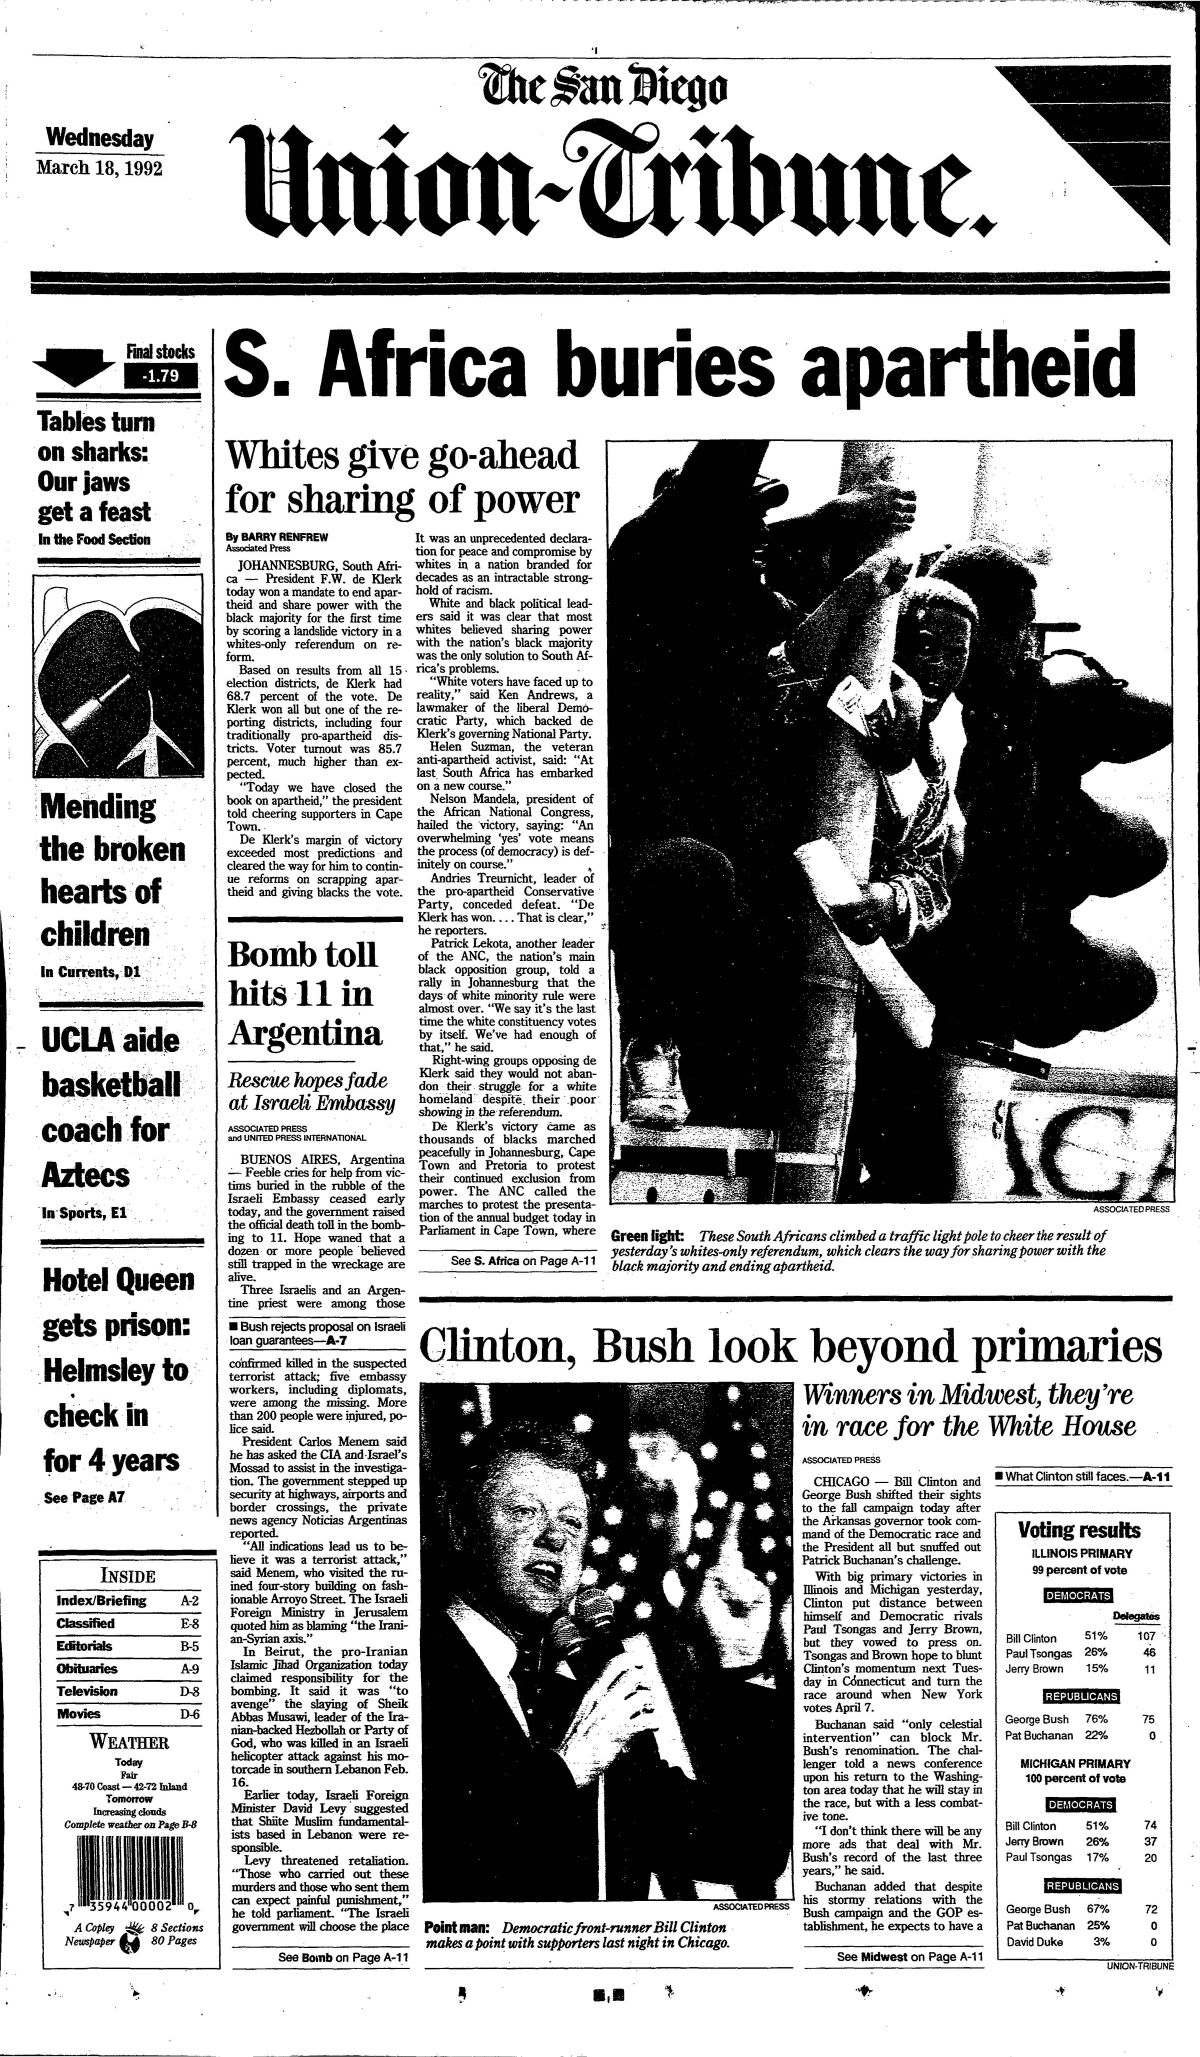 The front page of The San Diego Union-Tribune for March 17, 1992.